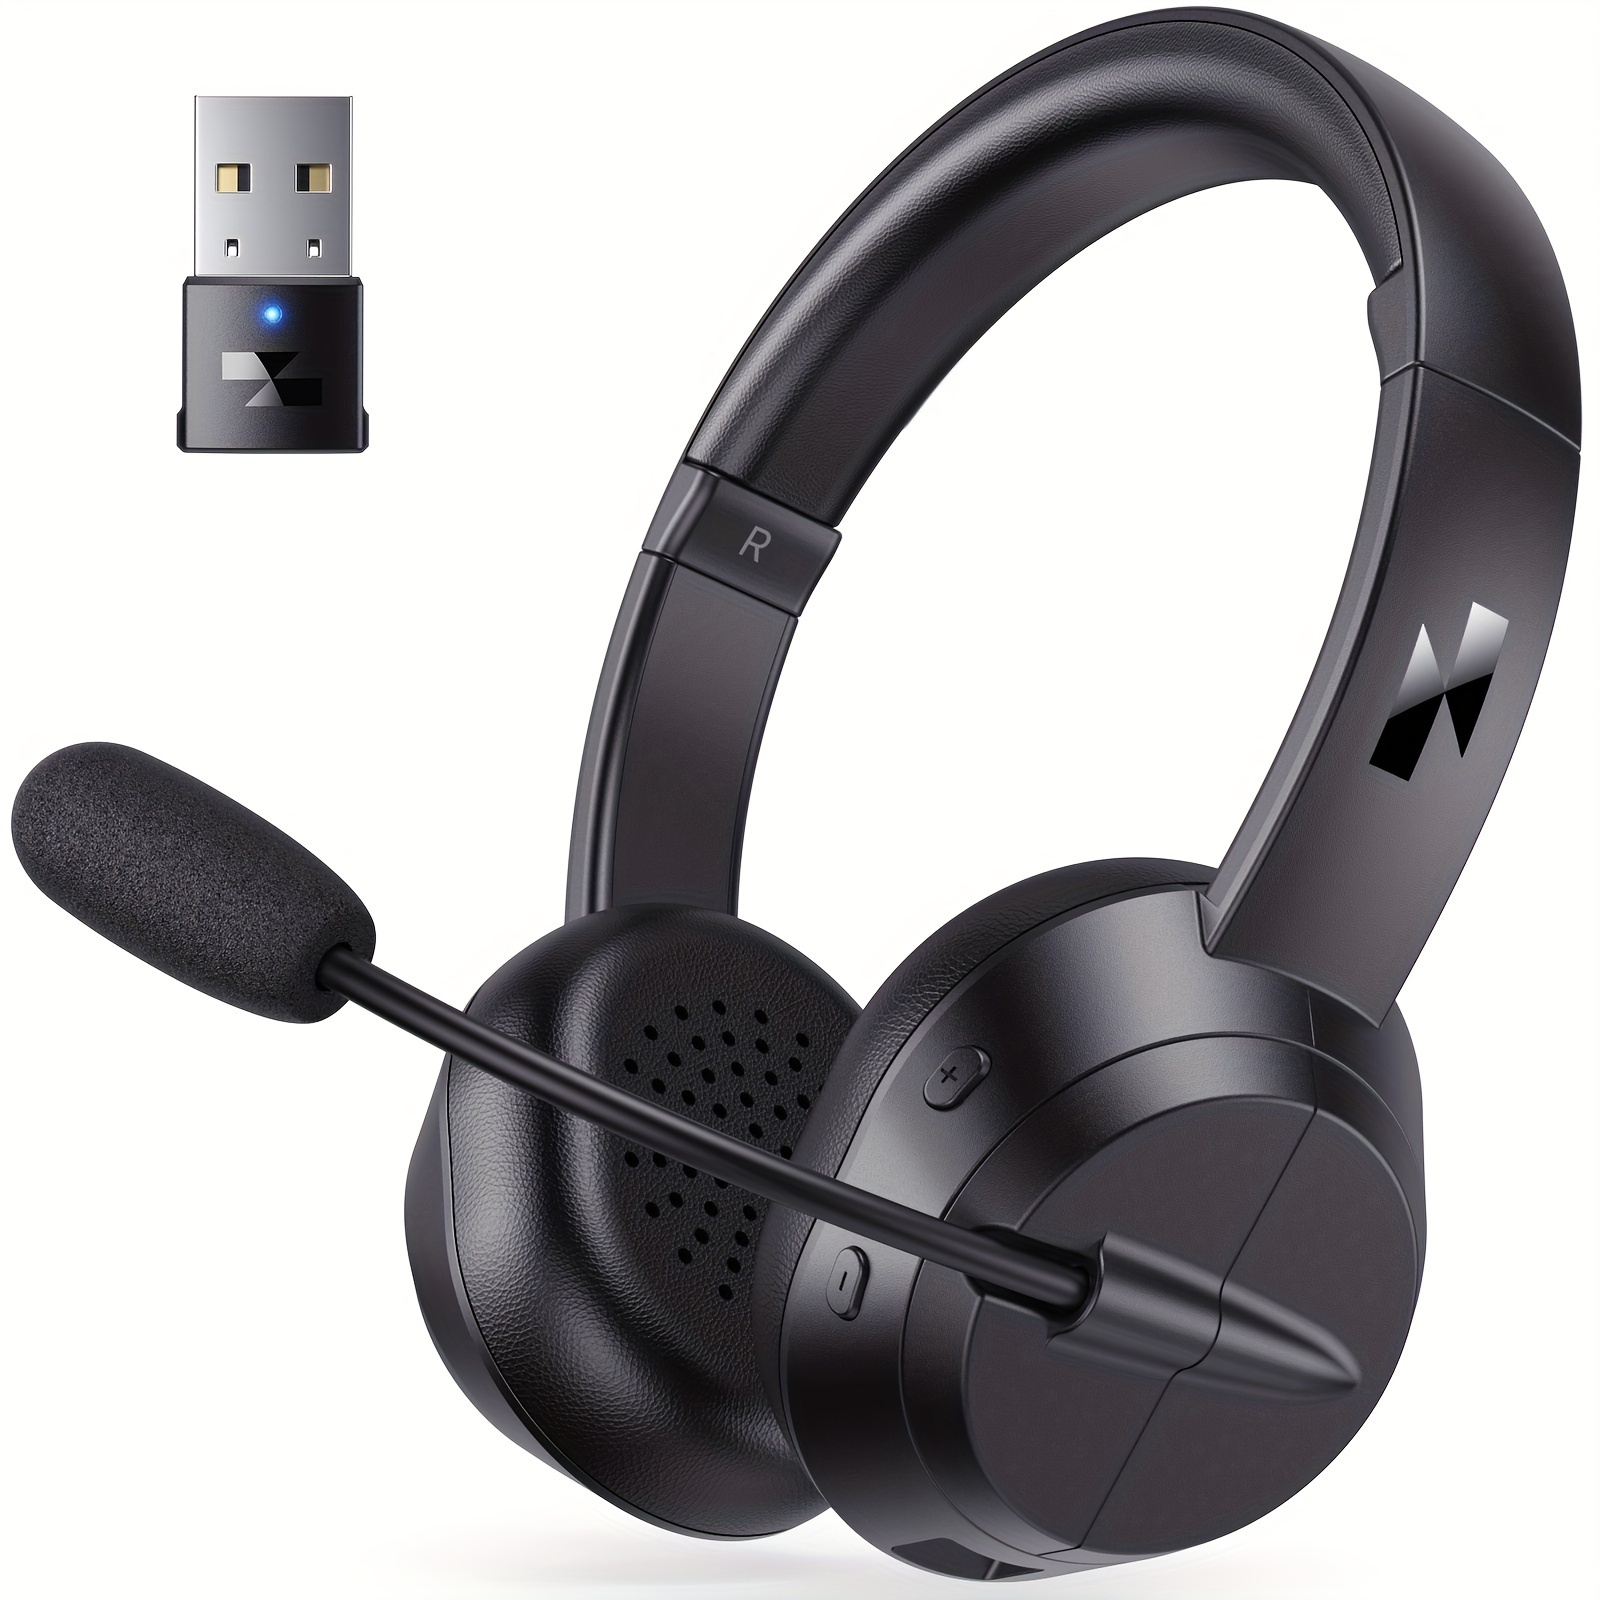 

Wireless Headset With Mic For Work, Bt Headset With Noise Cancelling Microphone, V5.3 Headphones With Usb Dongle & Mic Mute For Computer/laptop/pc/cell Phones/remote Work/call Center